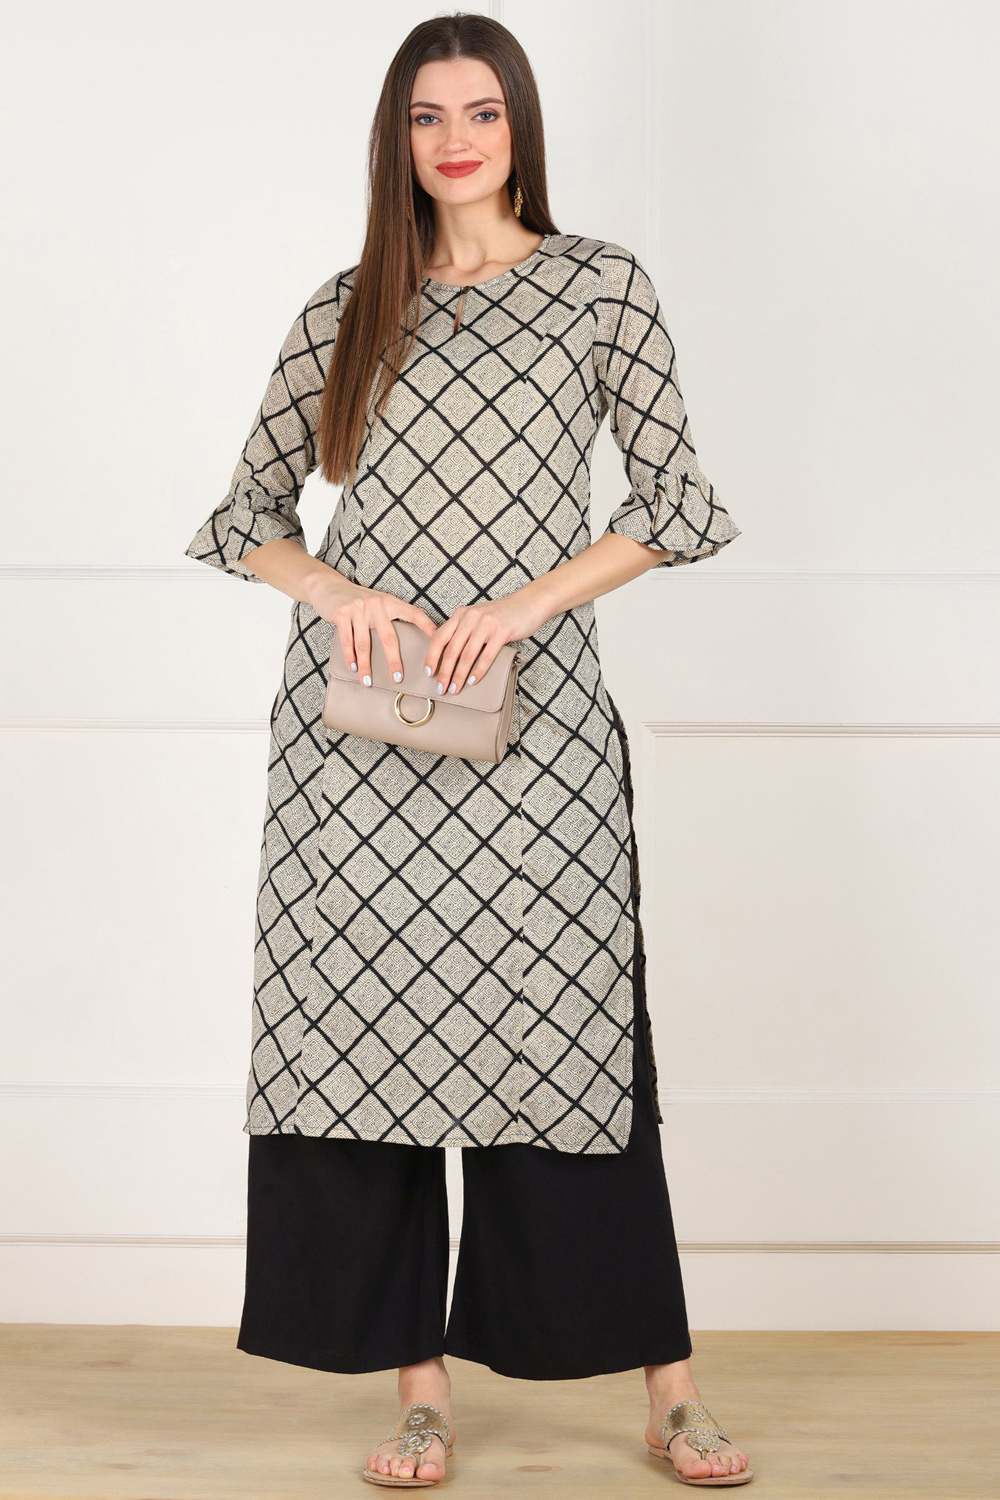 Checkered Print Kurti Indian Clothing in Denver, CO, Aurora, CO, Boulder, CO, Fort Collins, CO, Colorado Springs, CO, Parker, CO, Highlands Ranch, CO, Cherry Creek, CO, Centennial, CO, and Longmont, CO. NATIONWIDE SHIPPING USA- India Fashion X